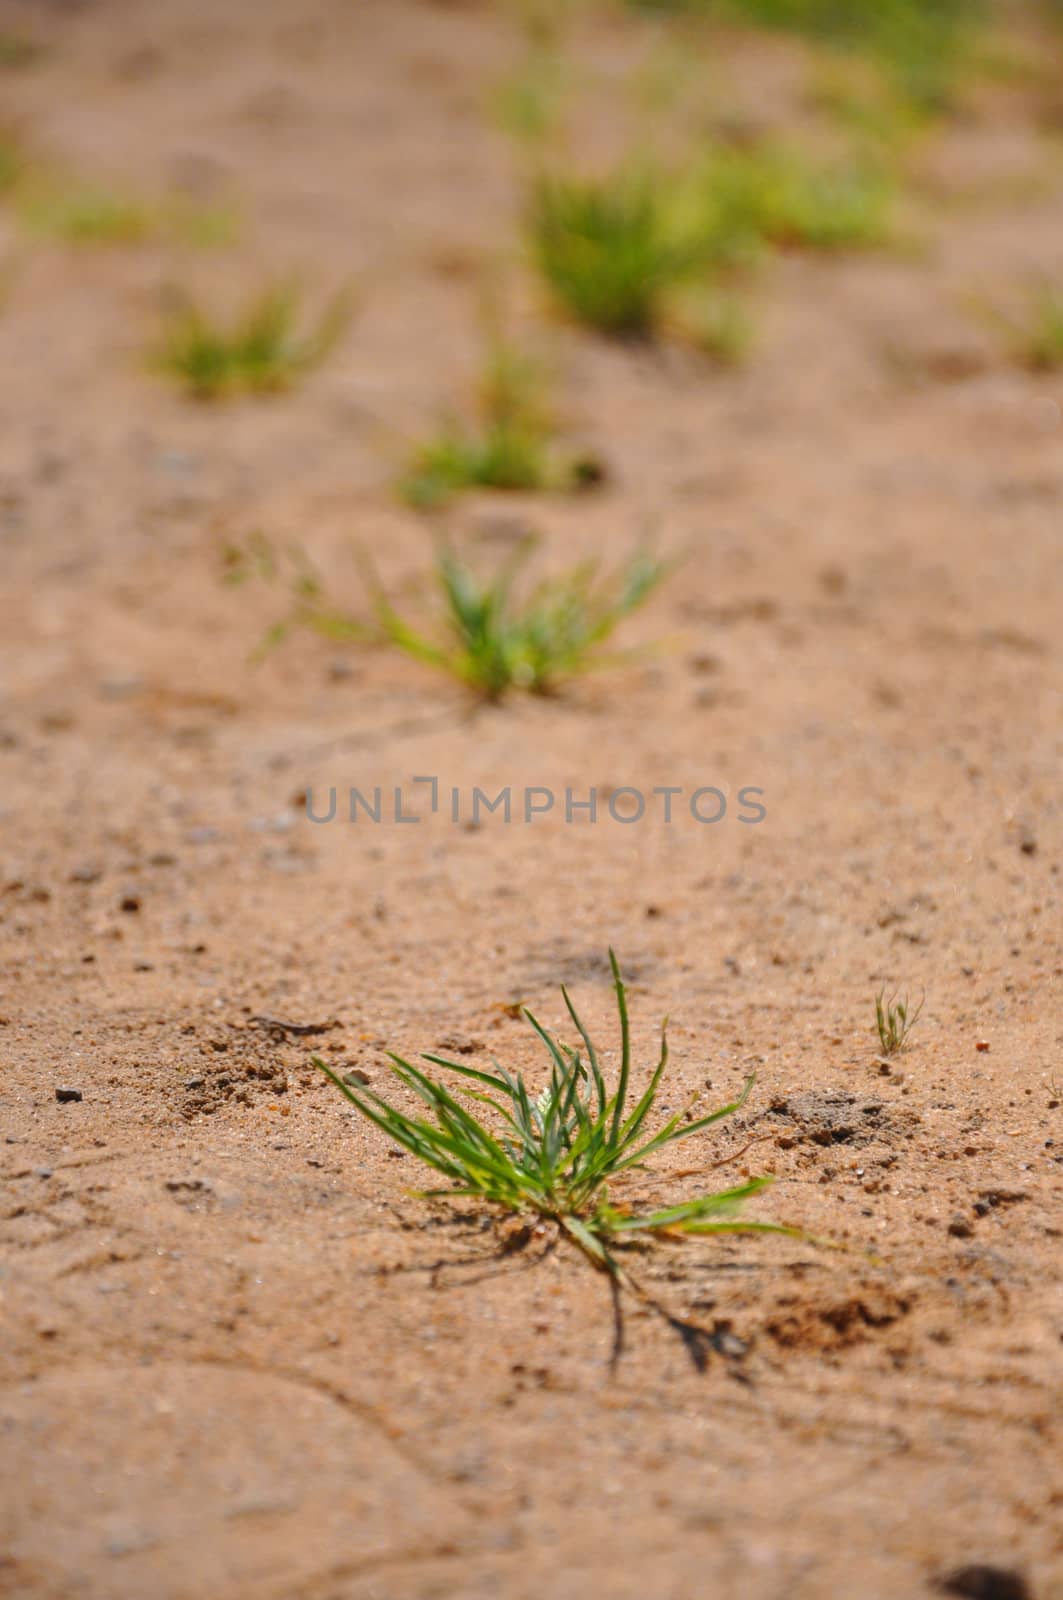 Colorful fresh green young grass growing in the sand close-up by Eagle2308